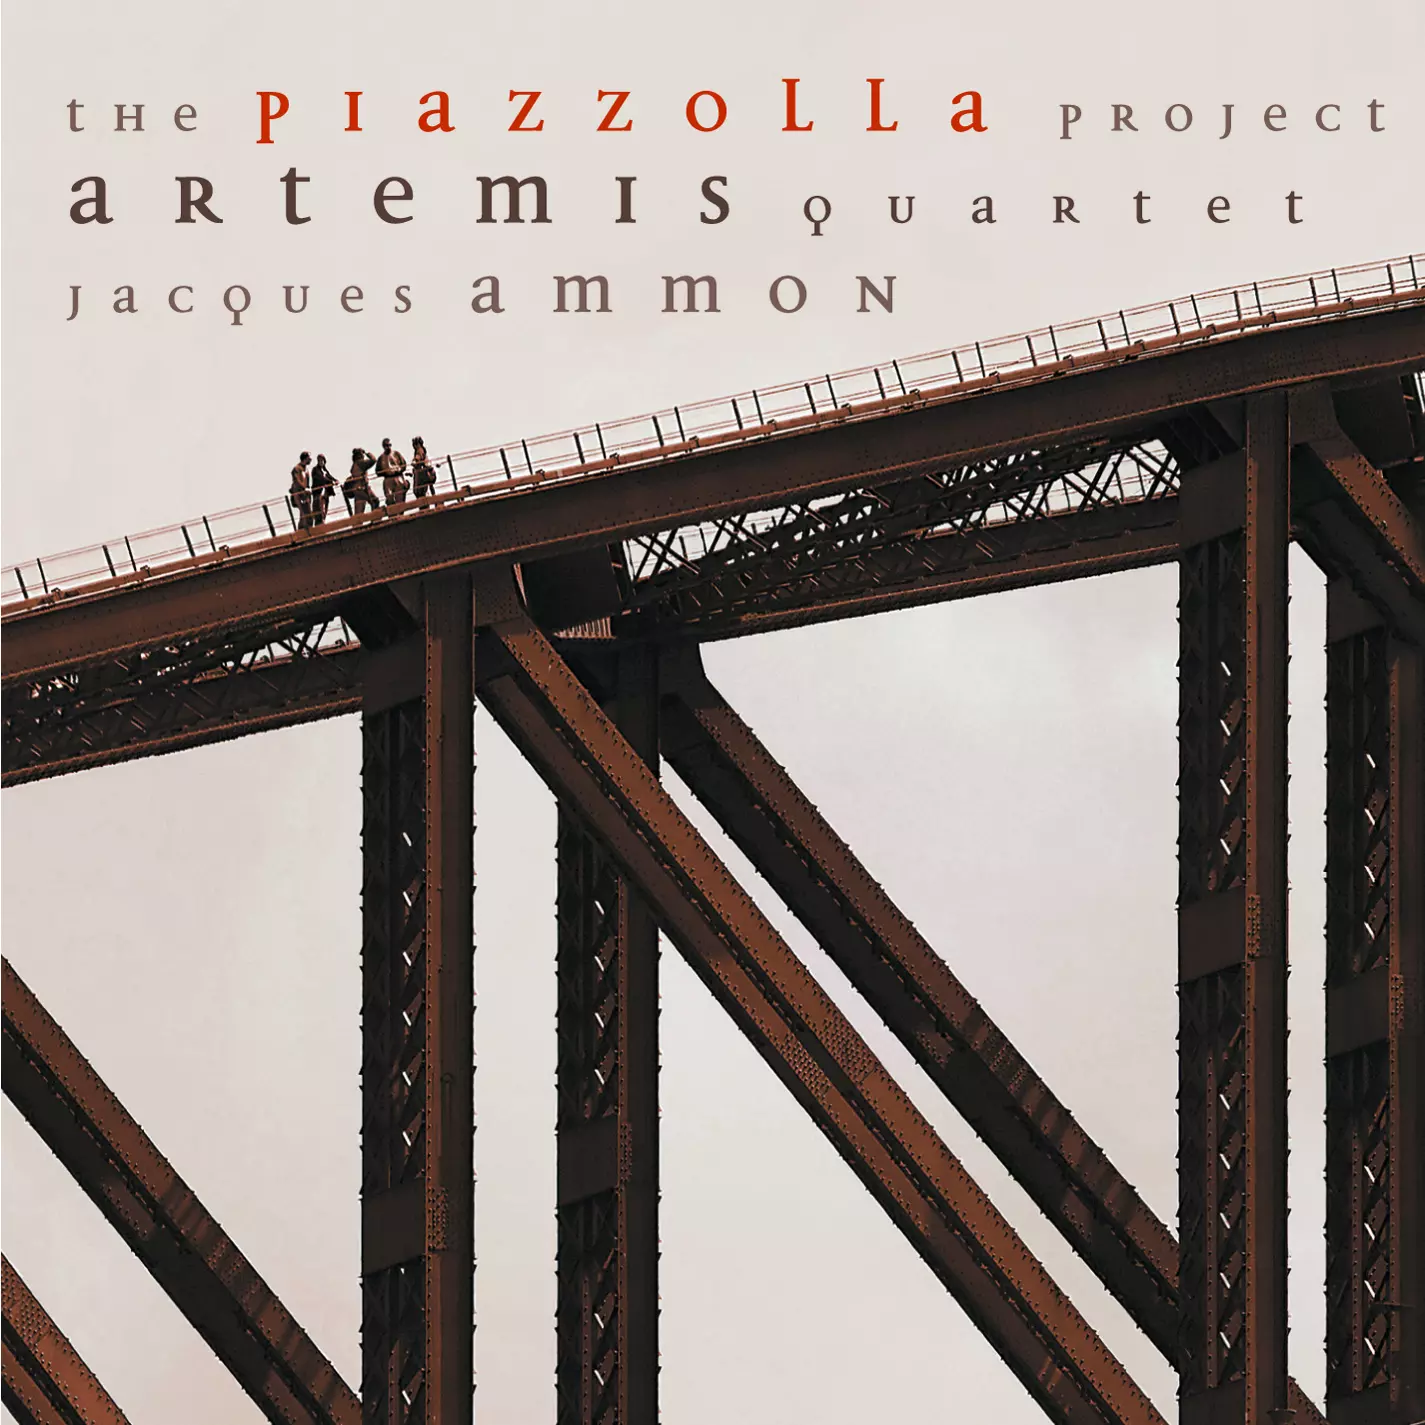 The Piazzolla Project